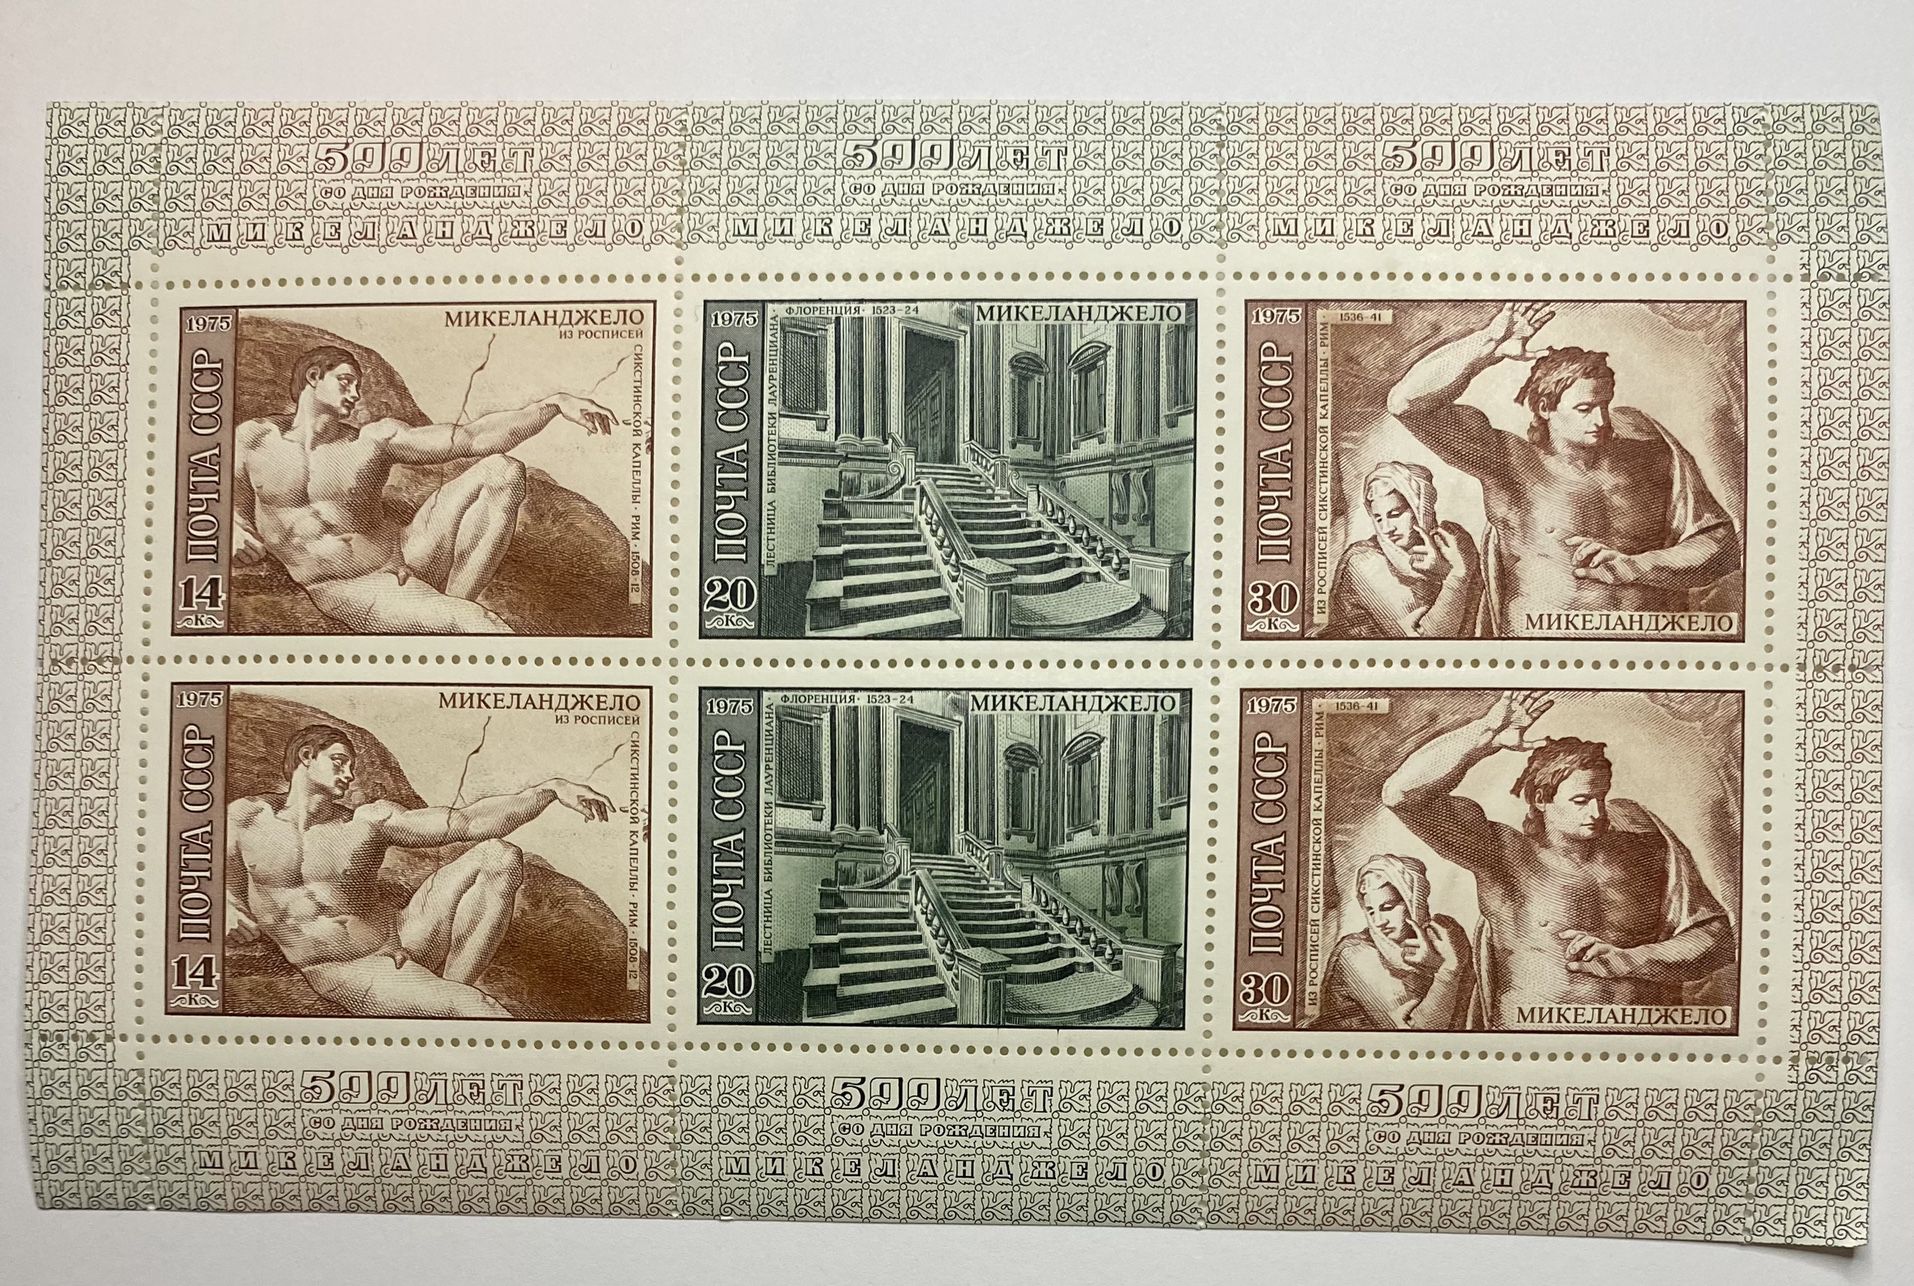 USSR Stamps .  Full series 1975 "500 years since the birth of Michelangelo Buonarroti (1(contact info removed))"